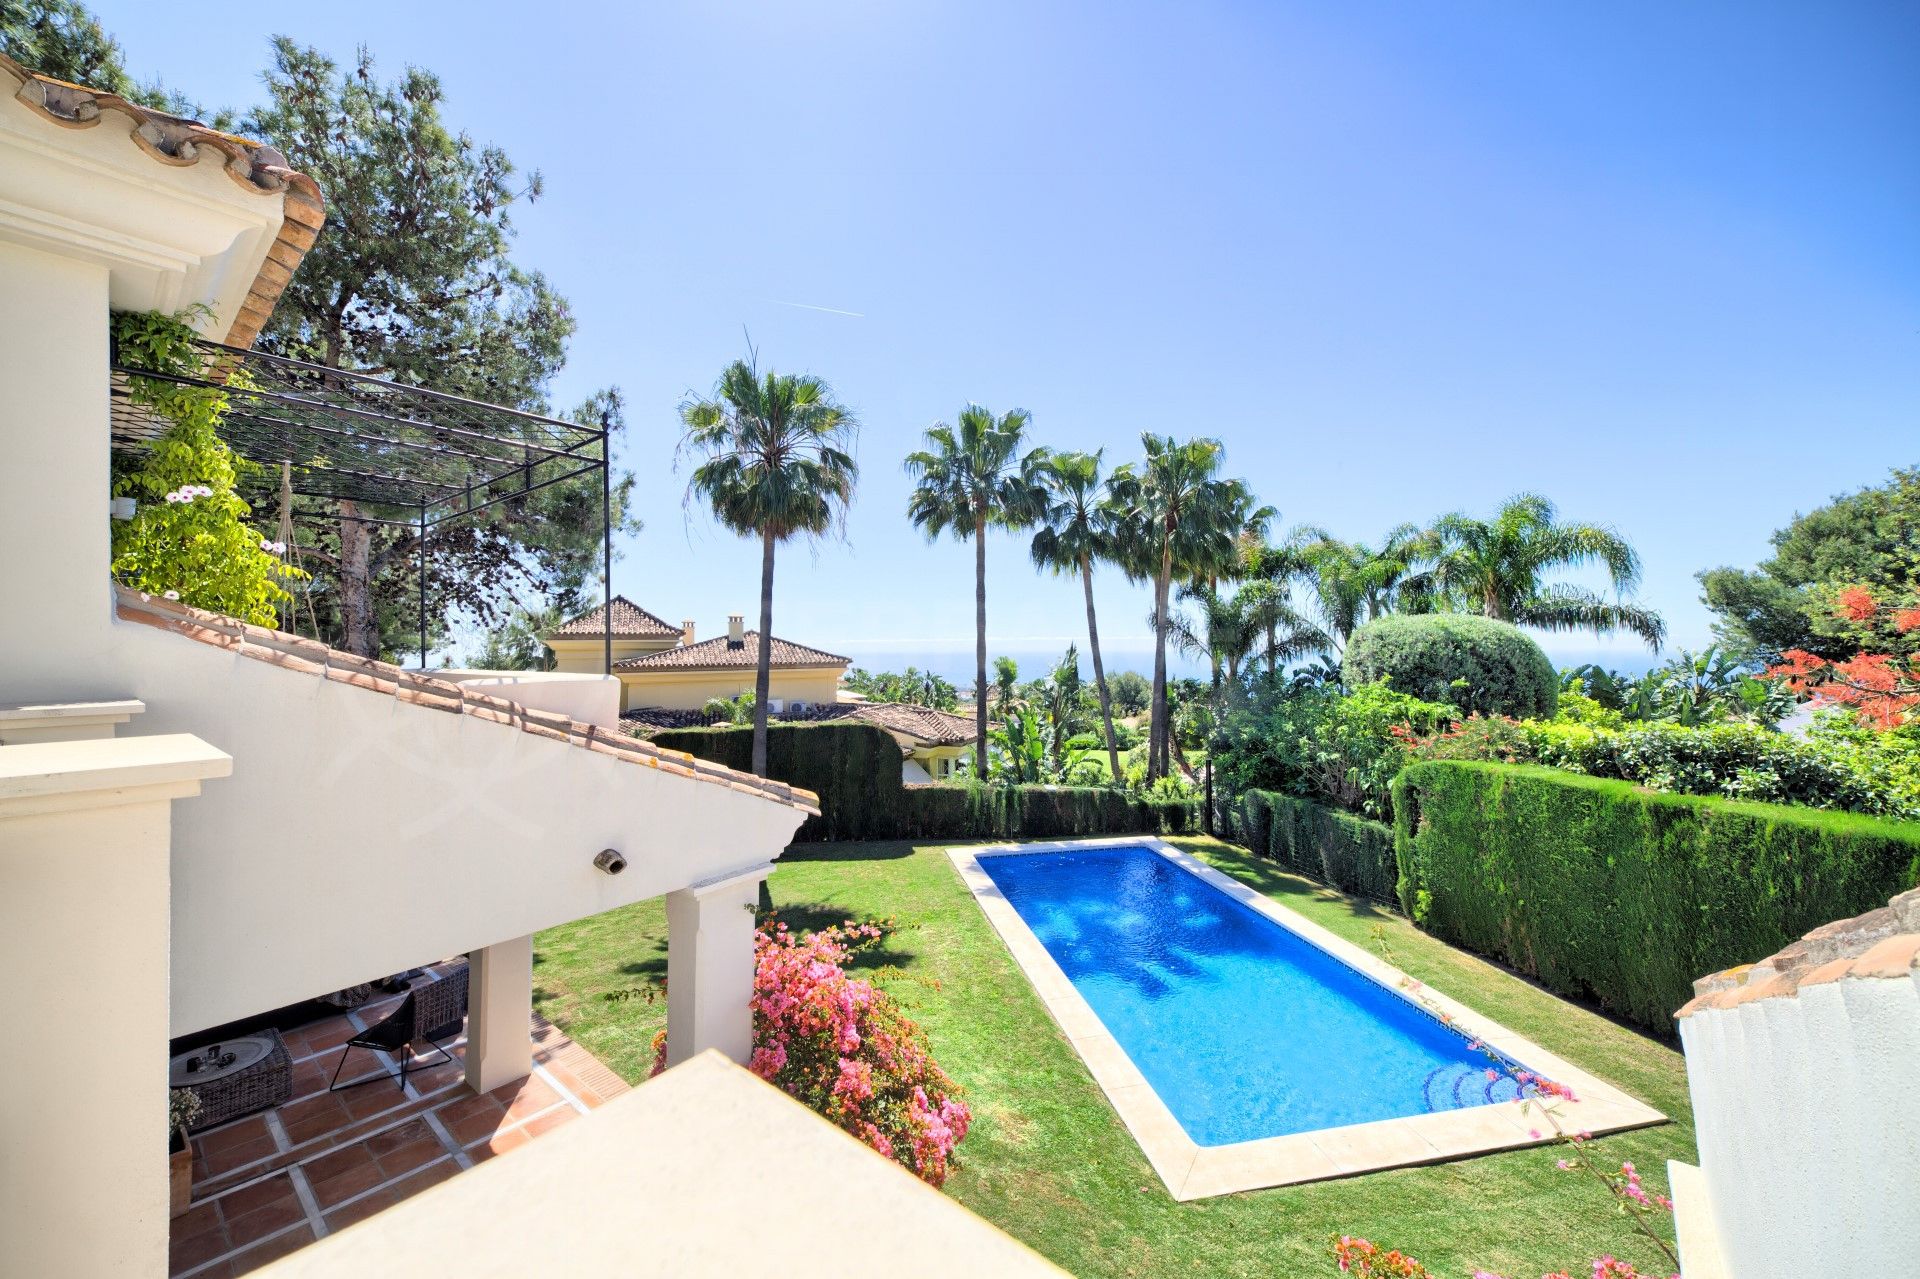 The costs of selling a property on the Costa del Sol